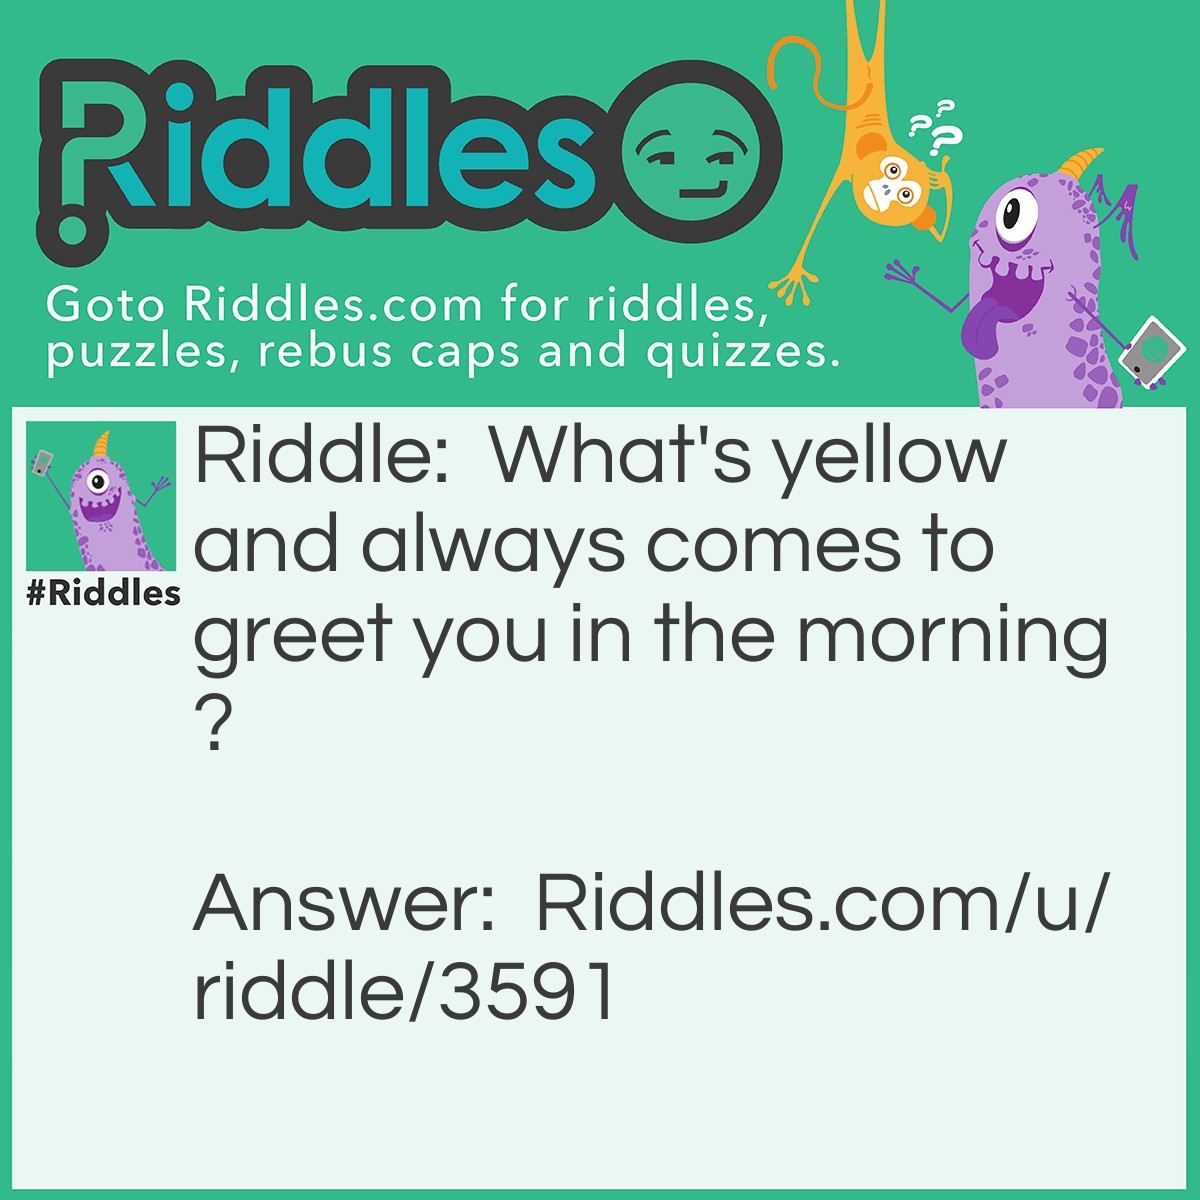 Riddle: What's yellow and always comes to greet you in the morning? Answer: The bus.